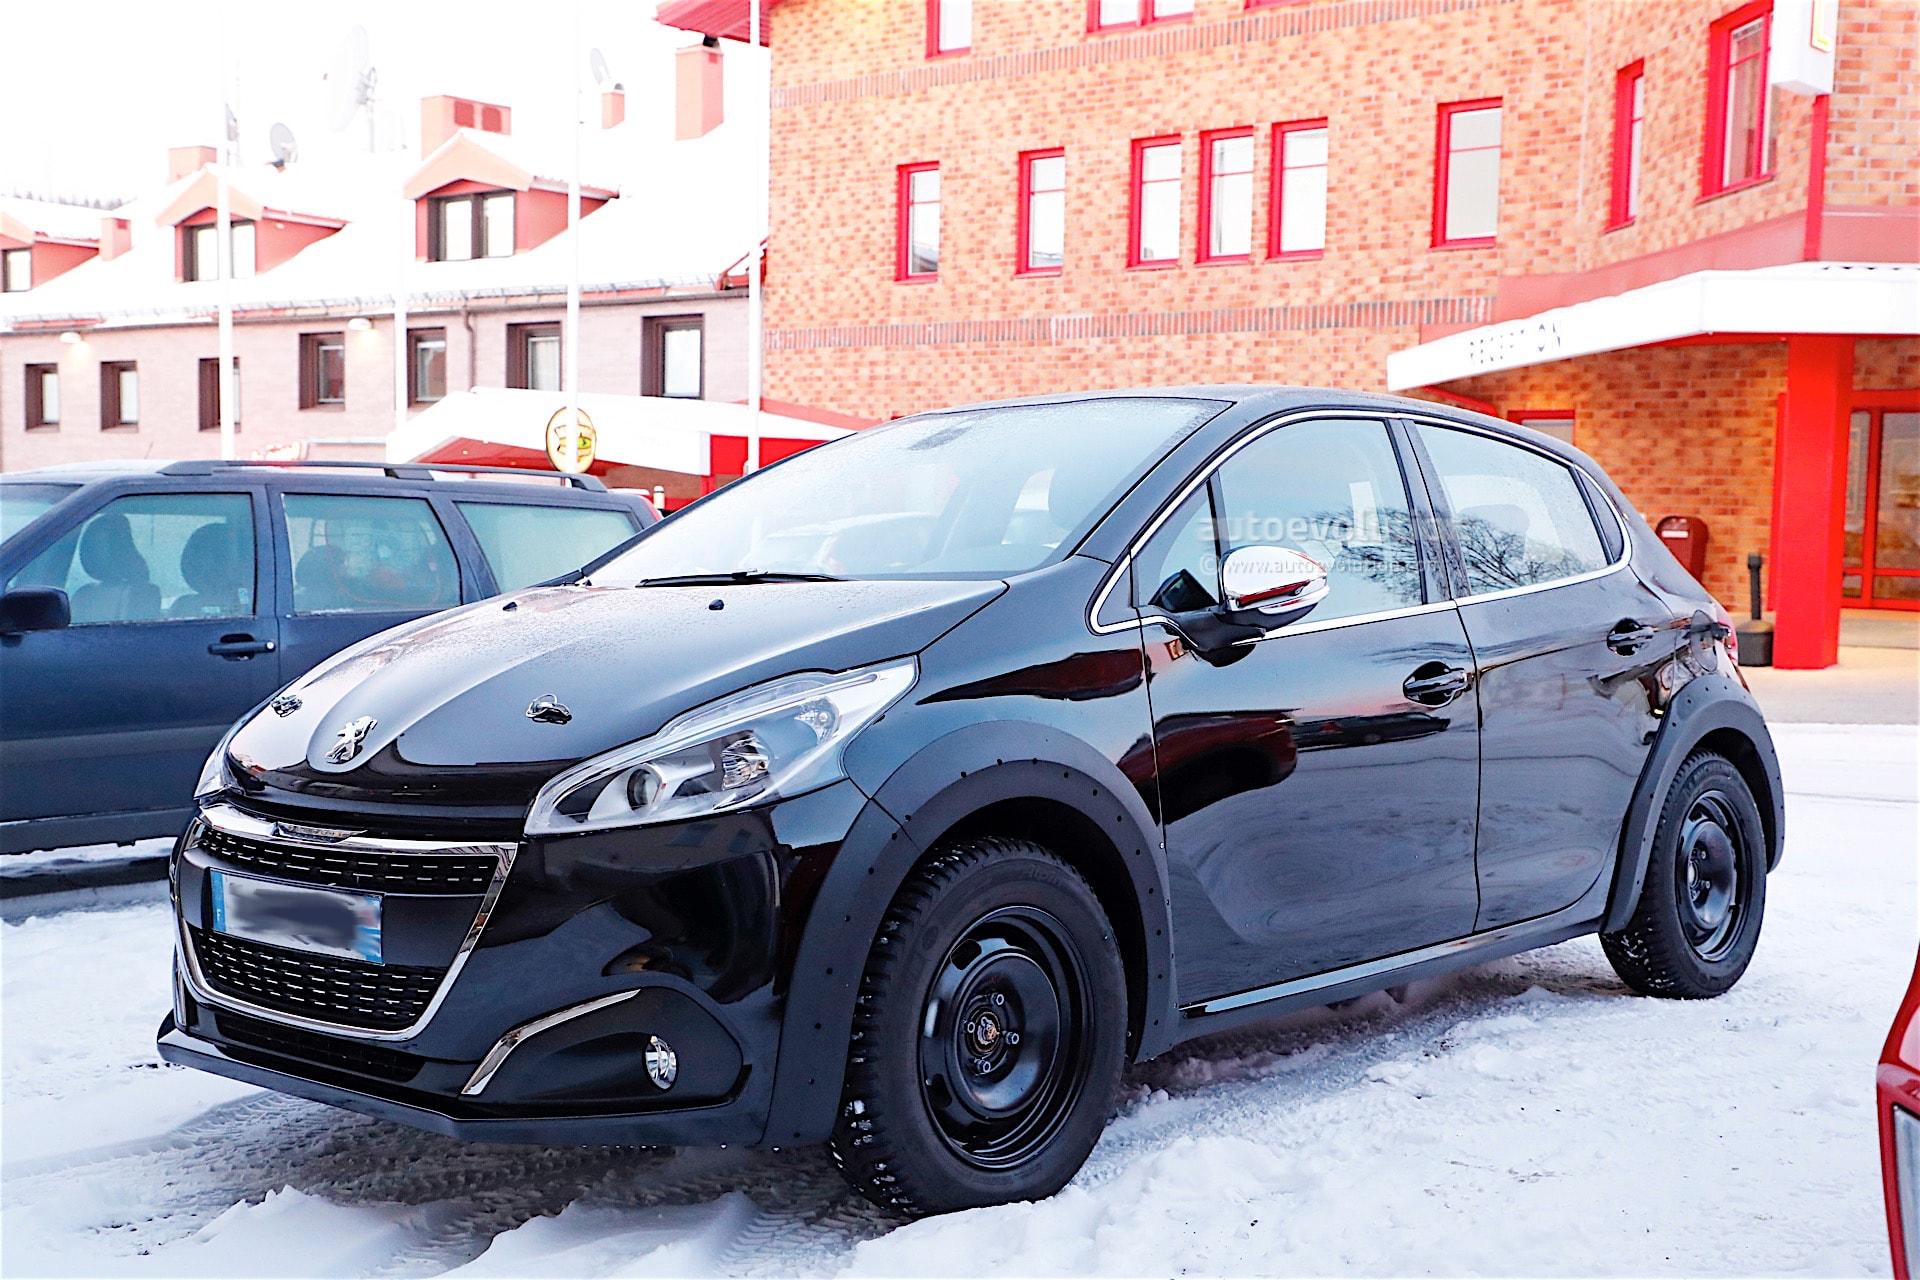 2018 Peugeot 208 Mule Spotted In Sweden autoevolution